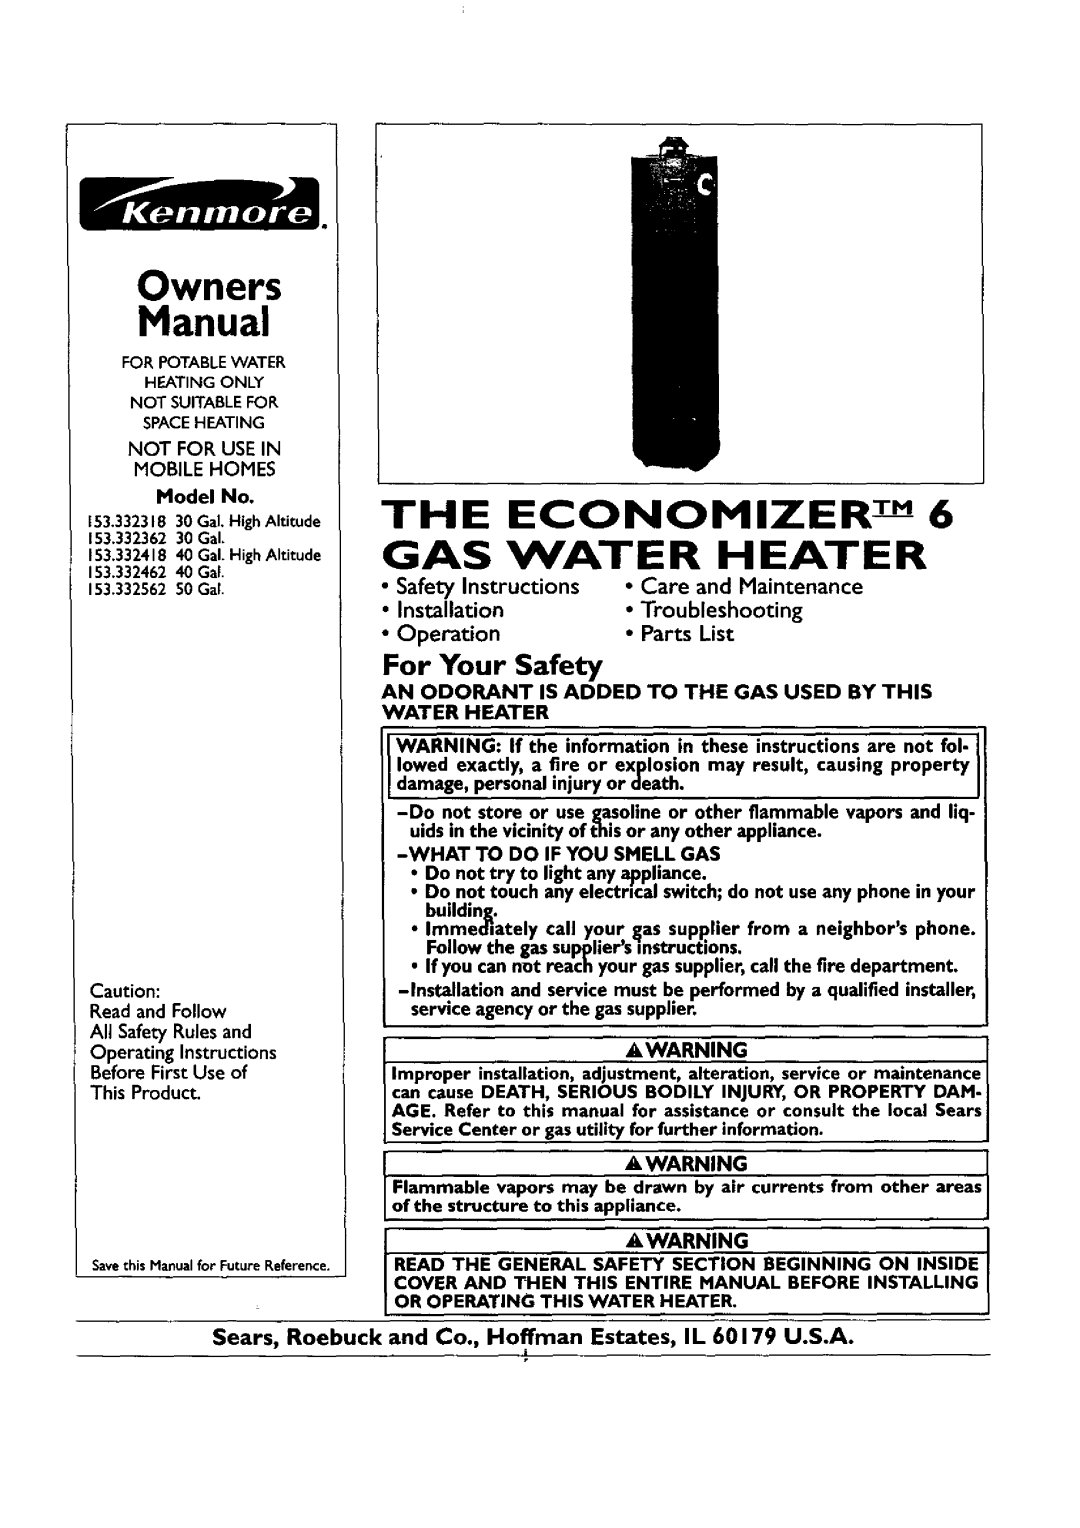 Kenmore 153.332362 owner manual Owners, Manual, Gas Water Heater, The Economizertm, For Your Safety, Installation, light 